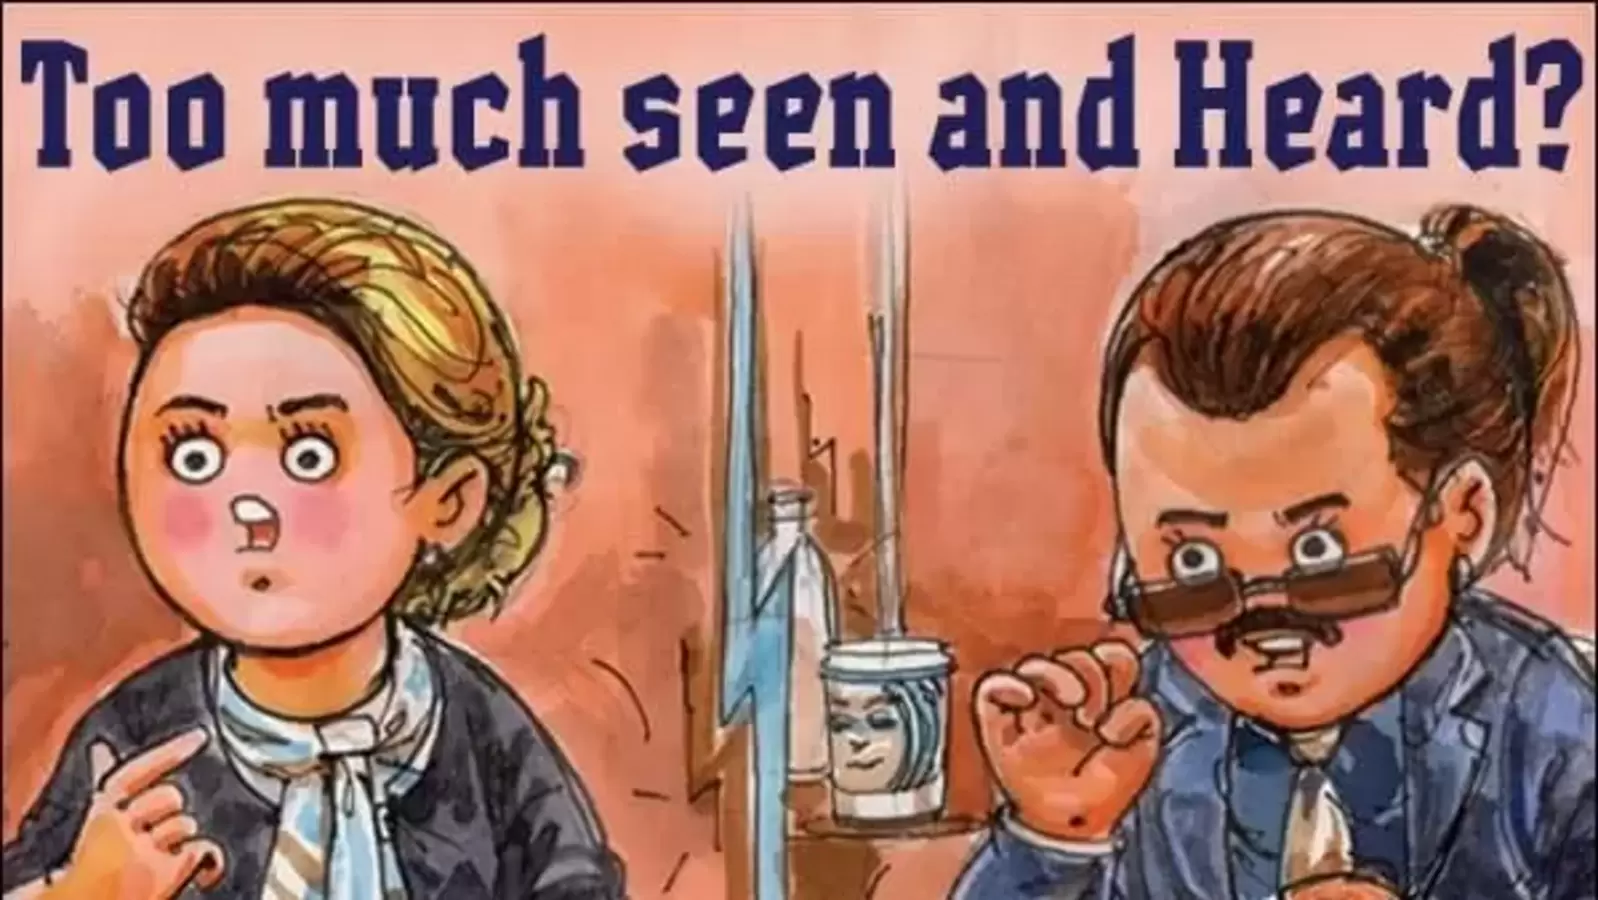 Johnny Depp and Amber Heard’s court battle features in Amul topical: ‘Too much seen and Heard?’